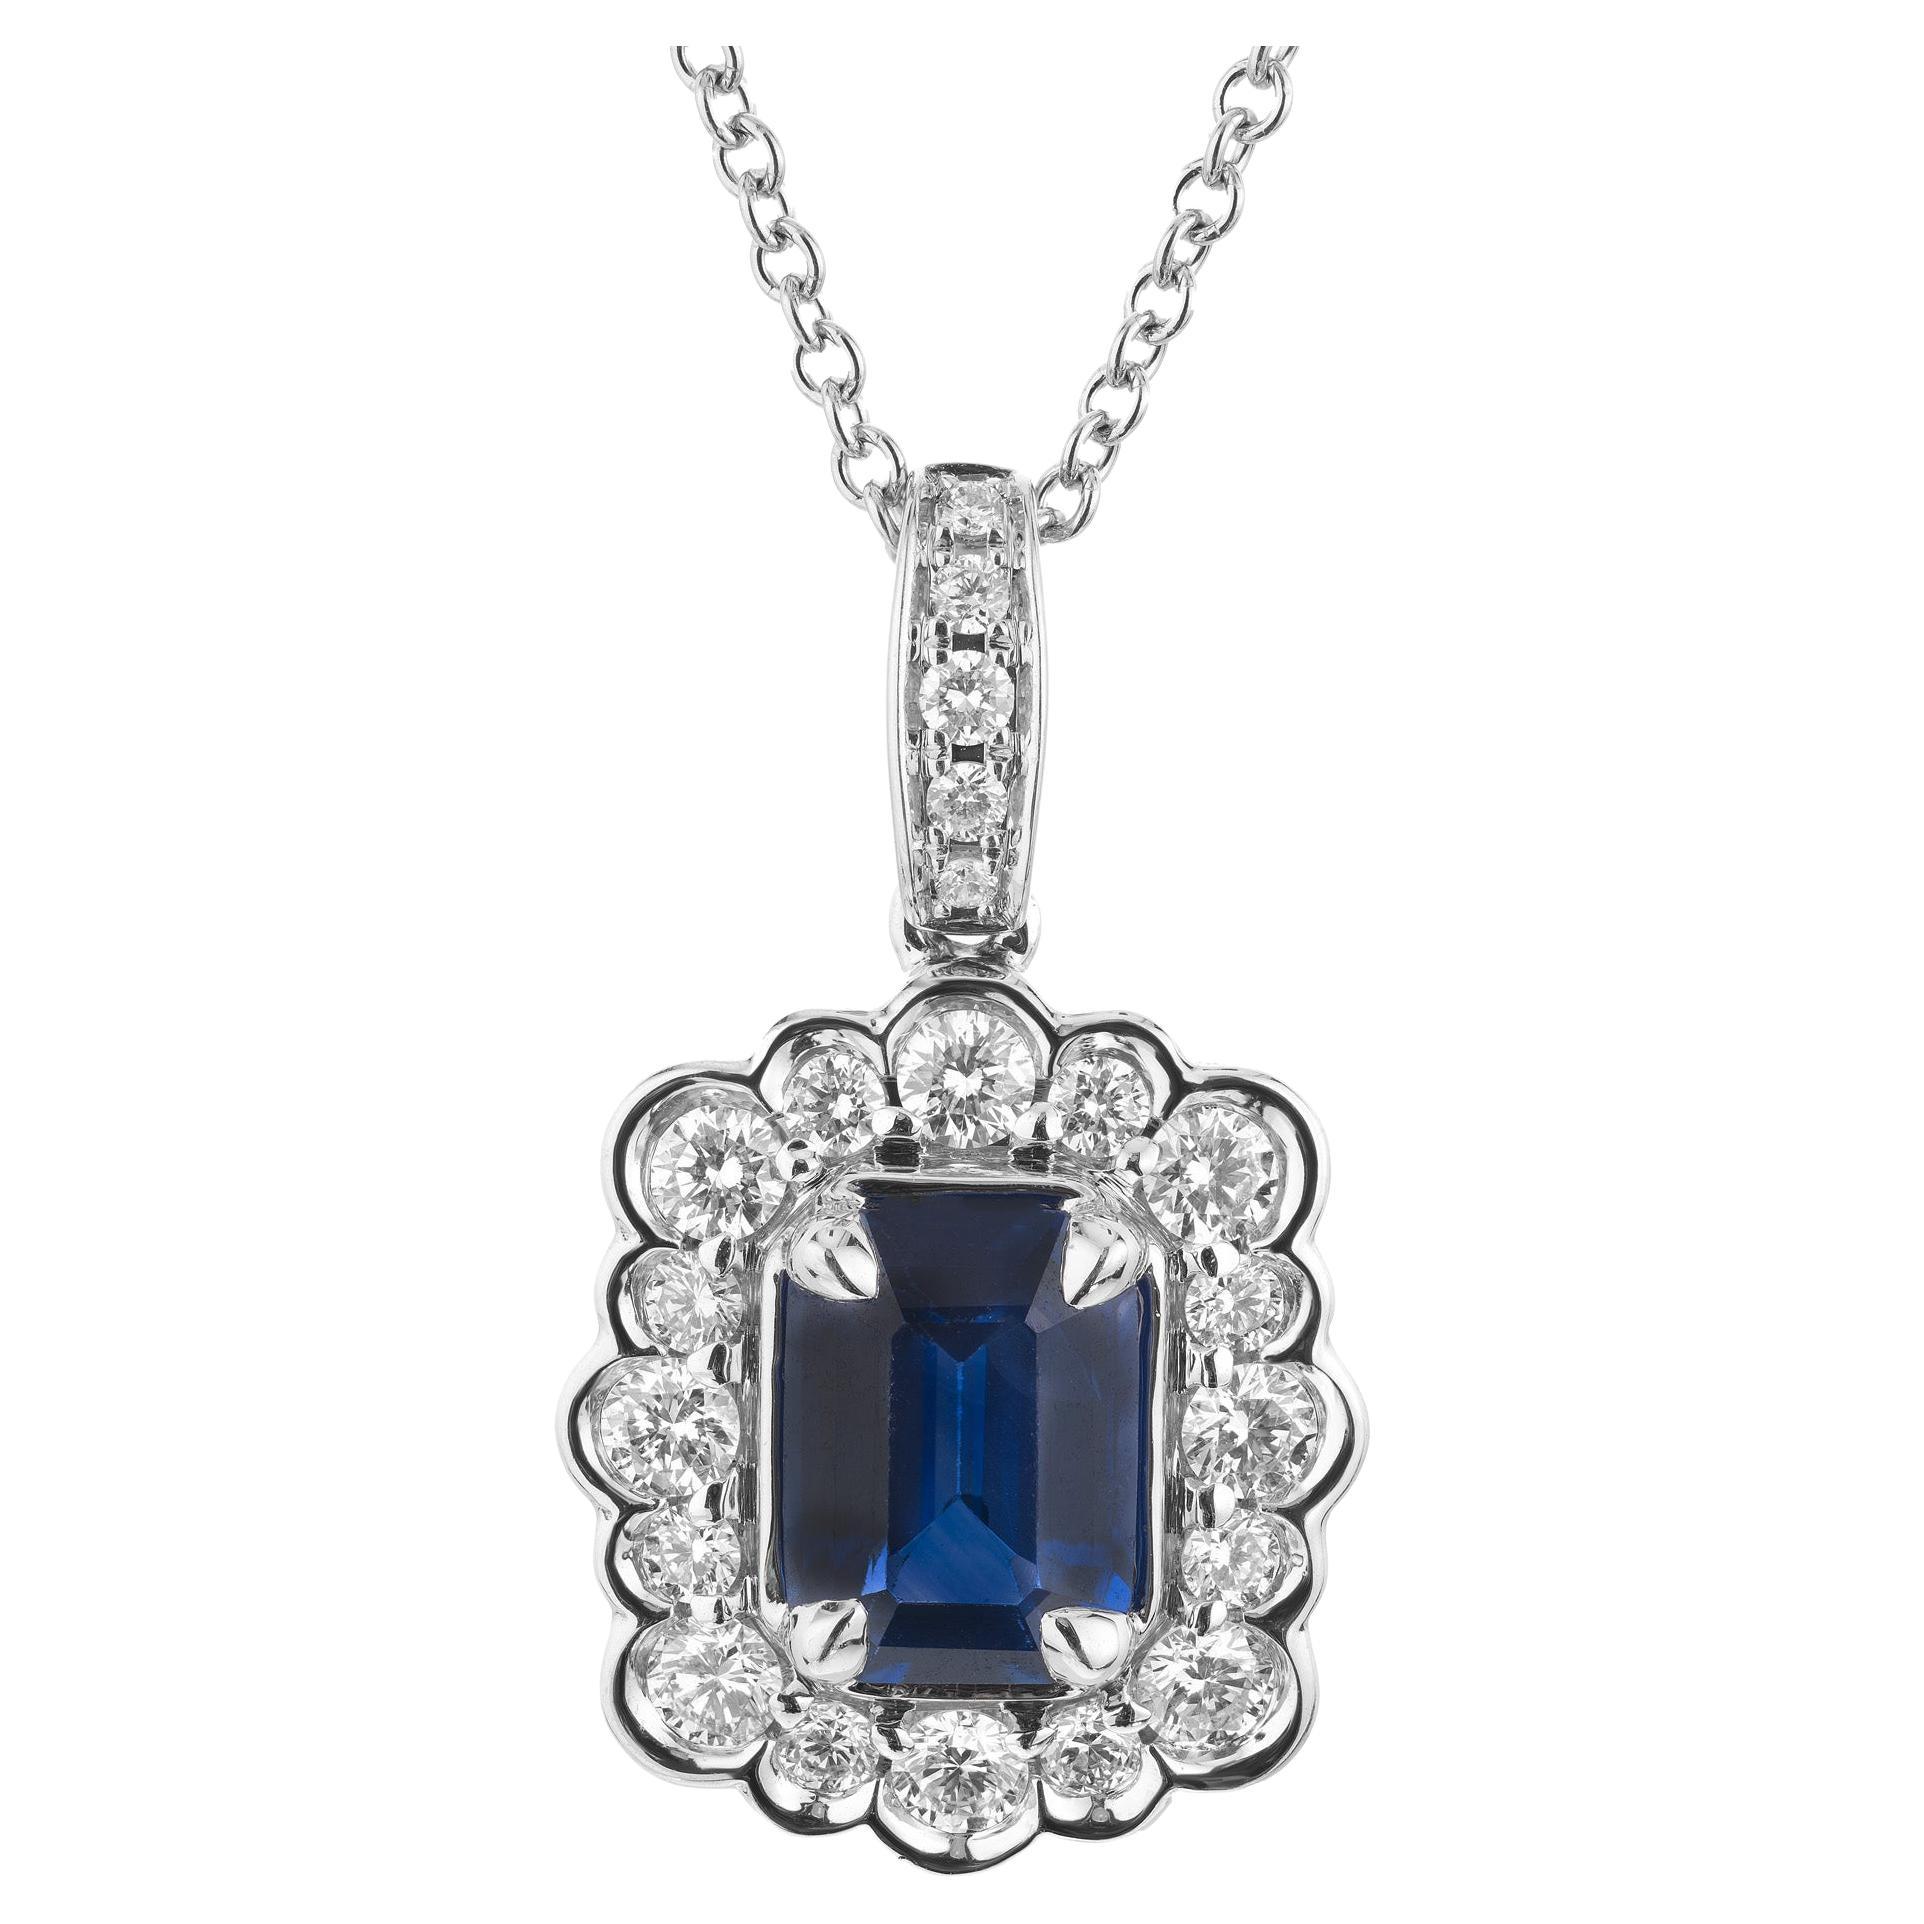 Peter Suchy GIA Certified 1.29 Carat Sapphire Diamond Halo Gold Pendant Necklace For Sale